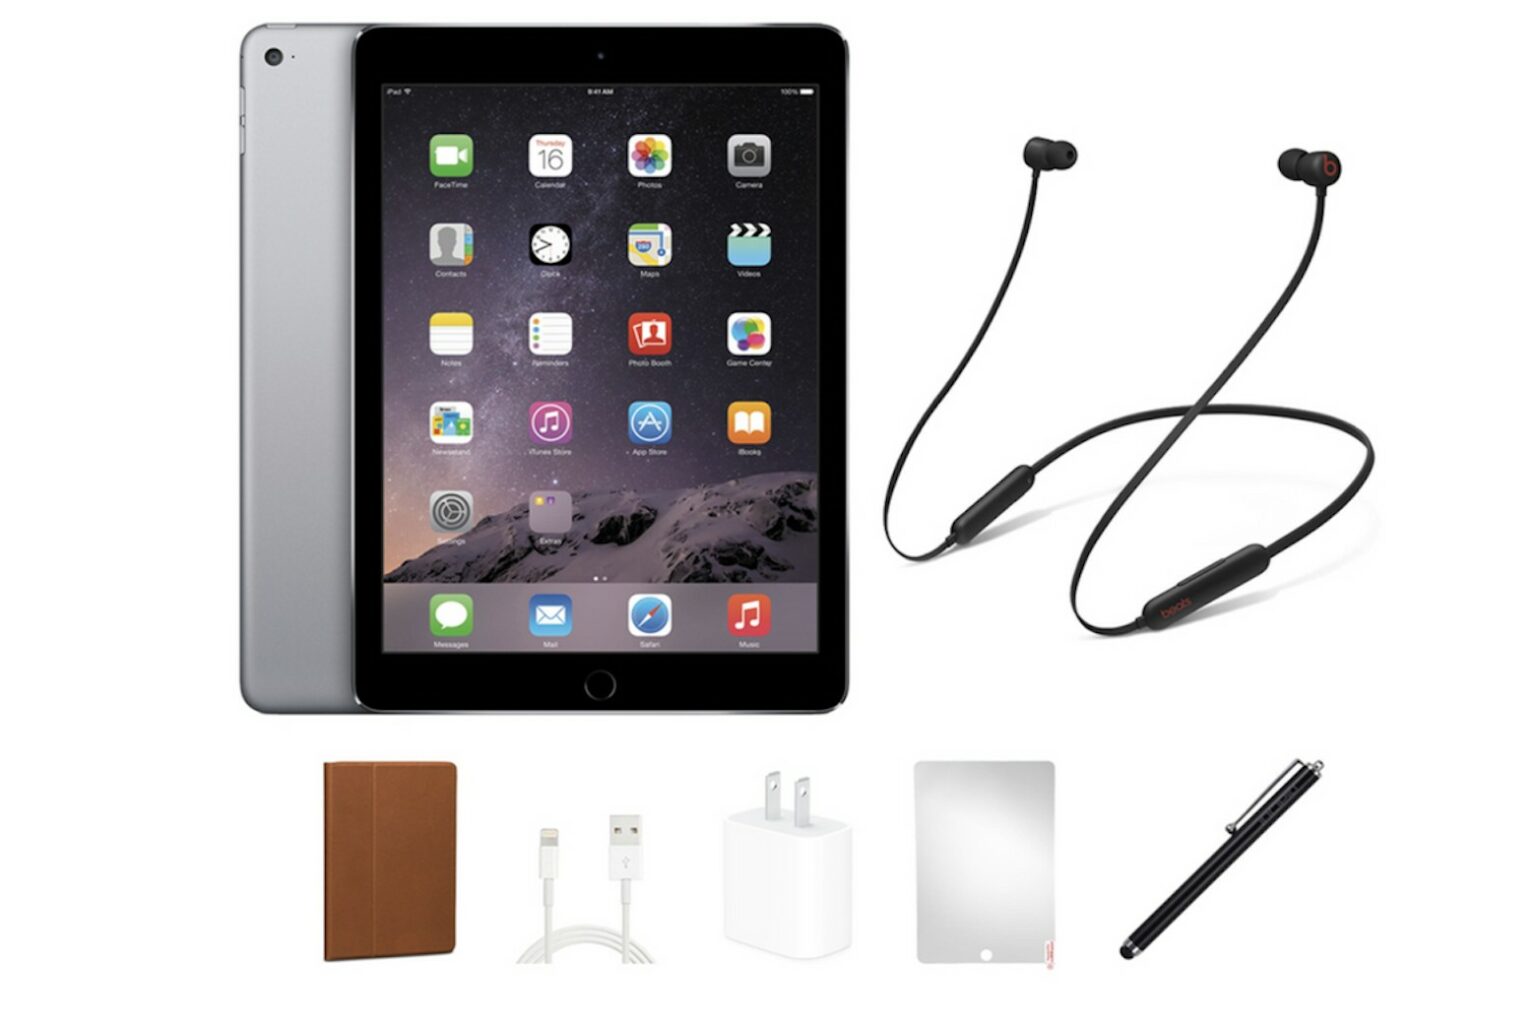 Get a Grade A refurbished bundle featuring an iPad Air and Beats headphones for only $99.97 before Prime Day.